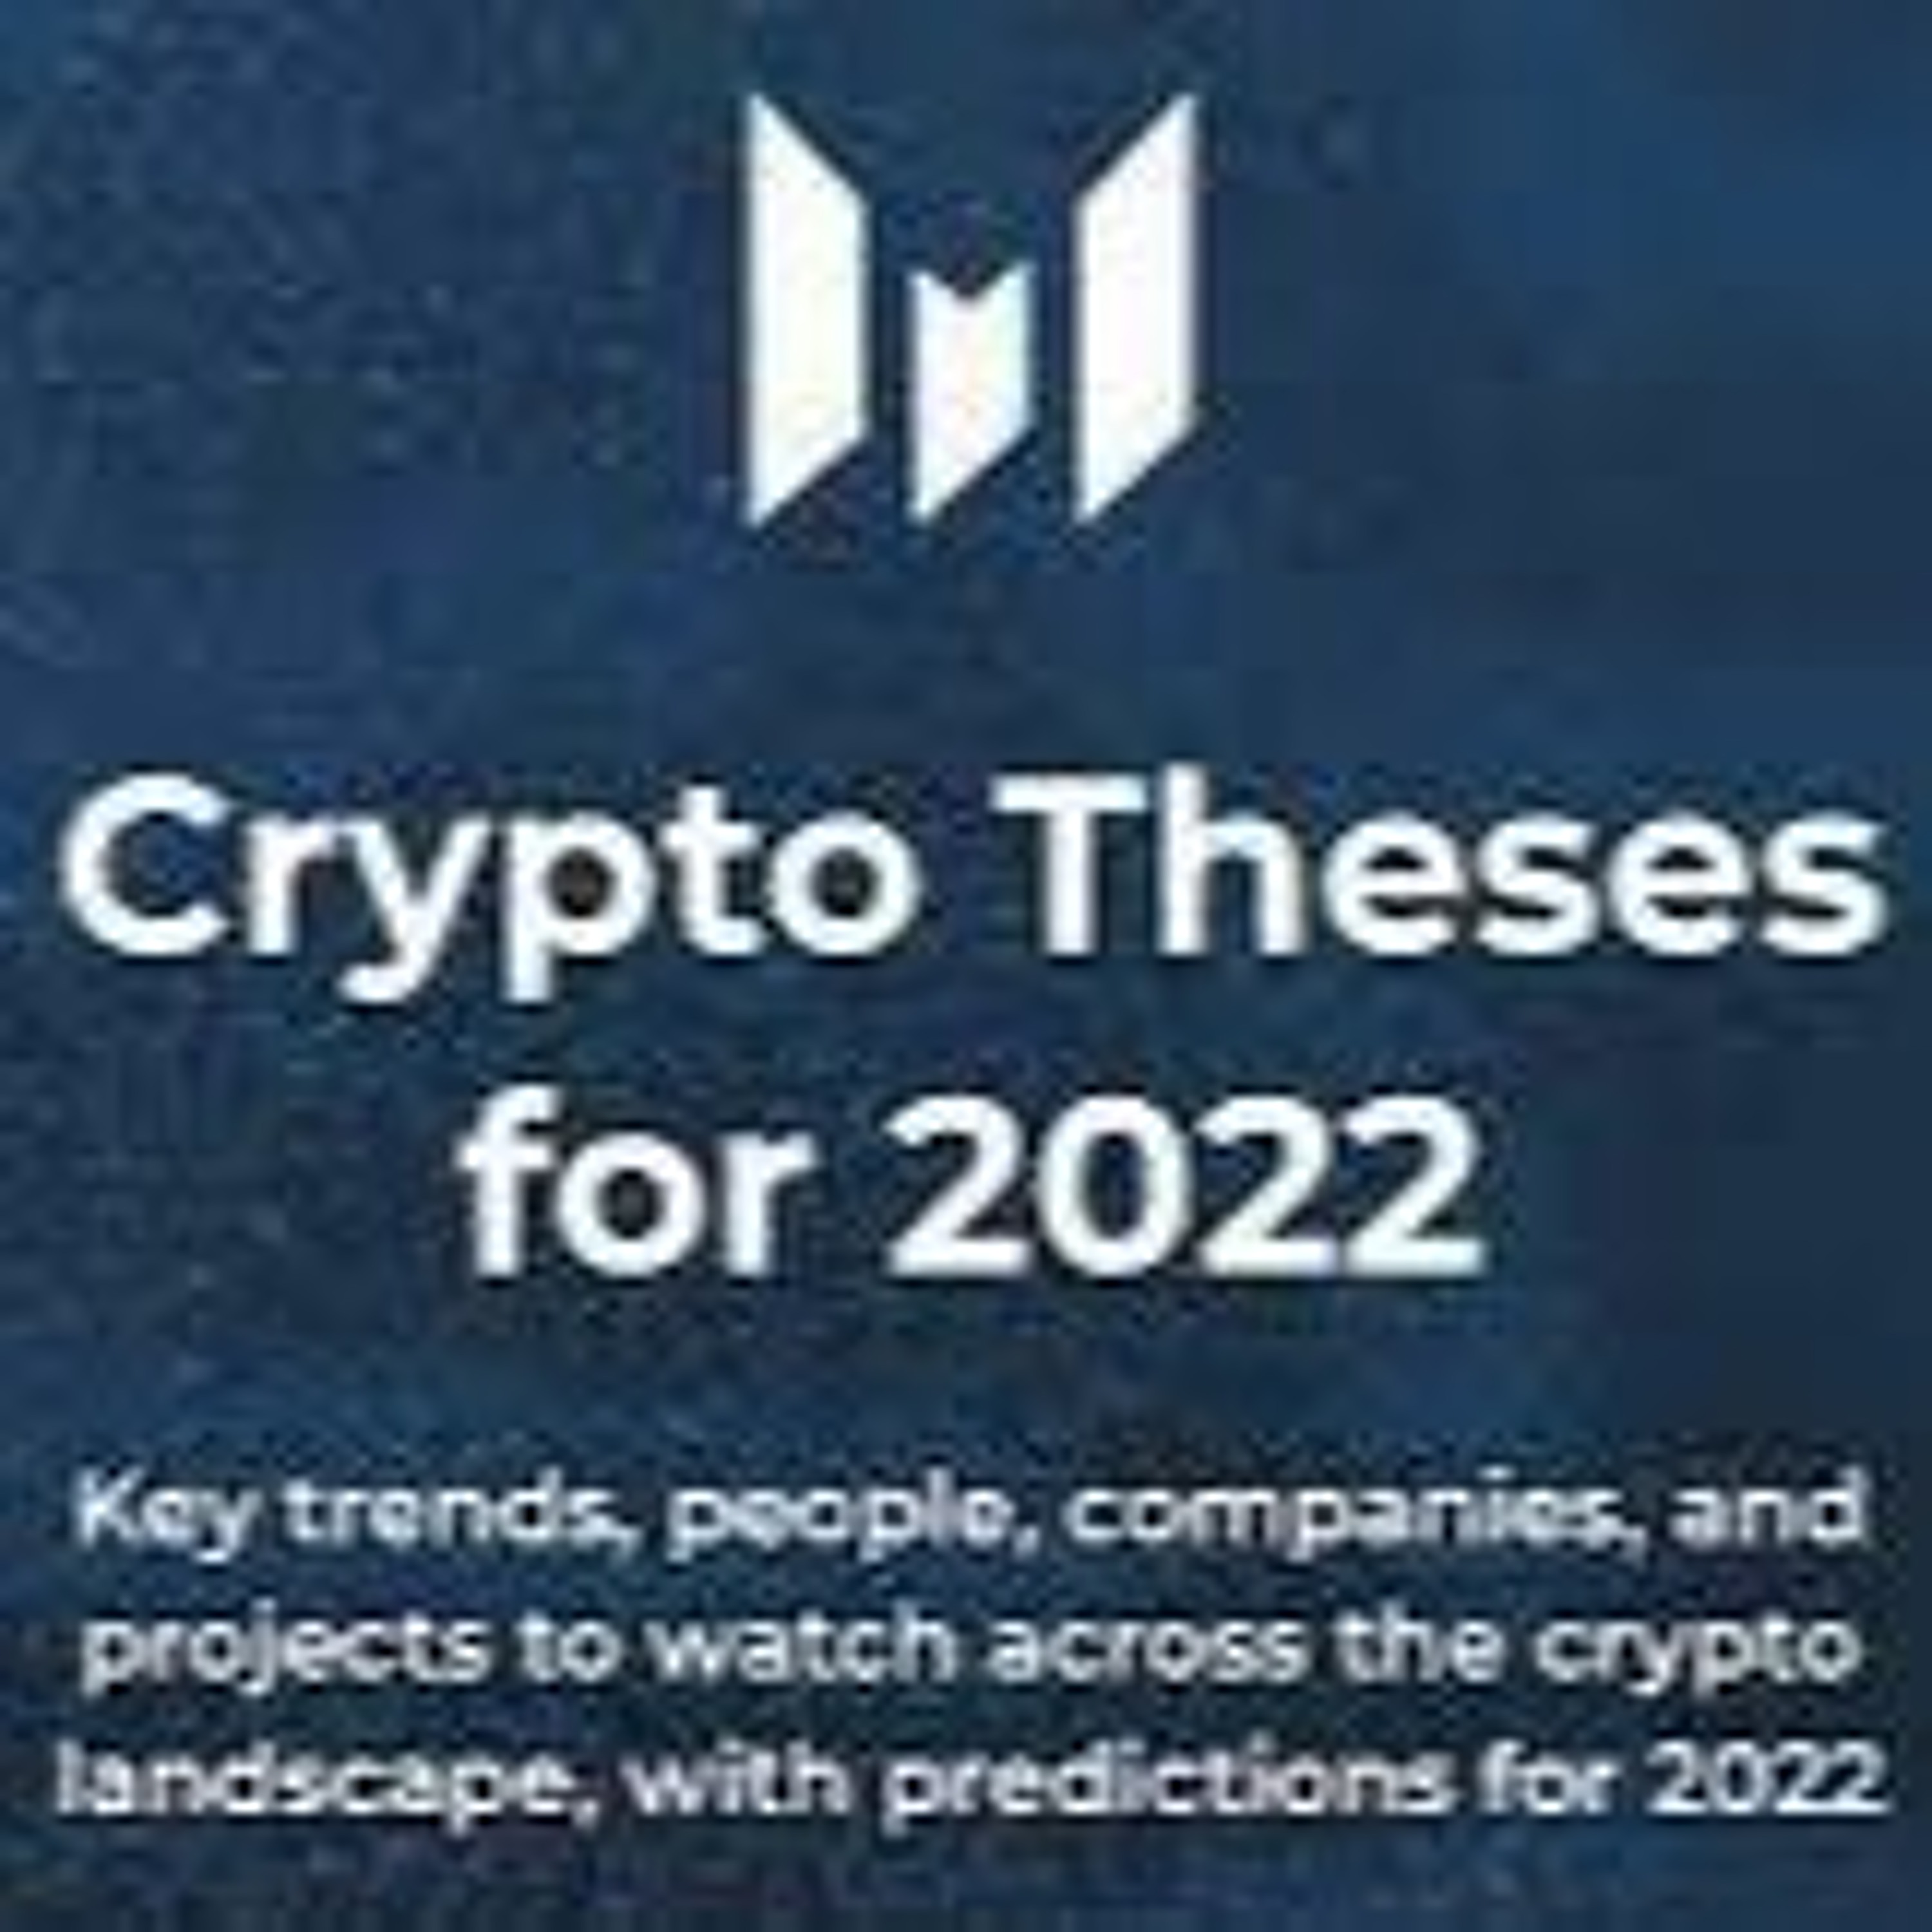 2022 crypto theses by Messari: Part 3 – Gen Alpha Talk ...